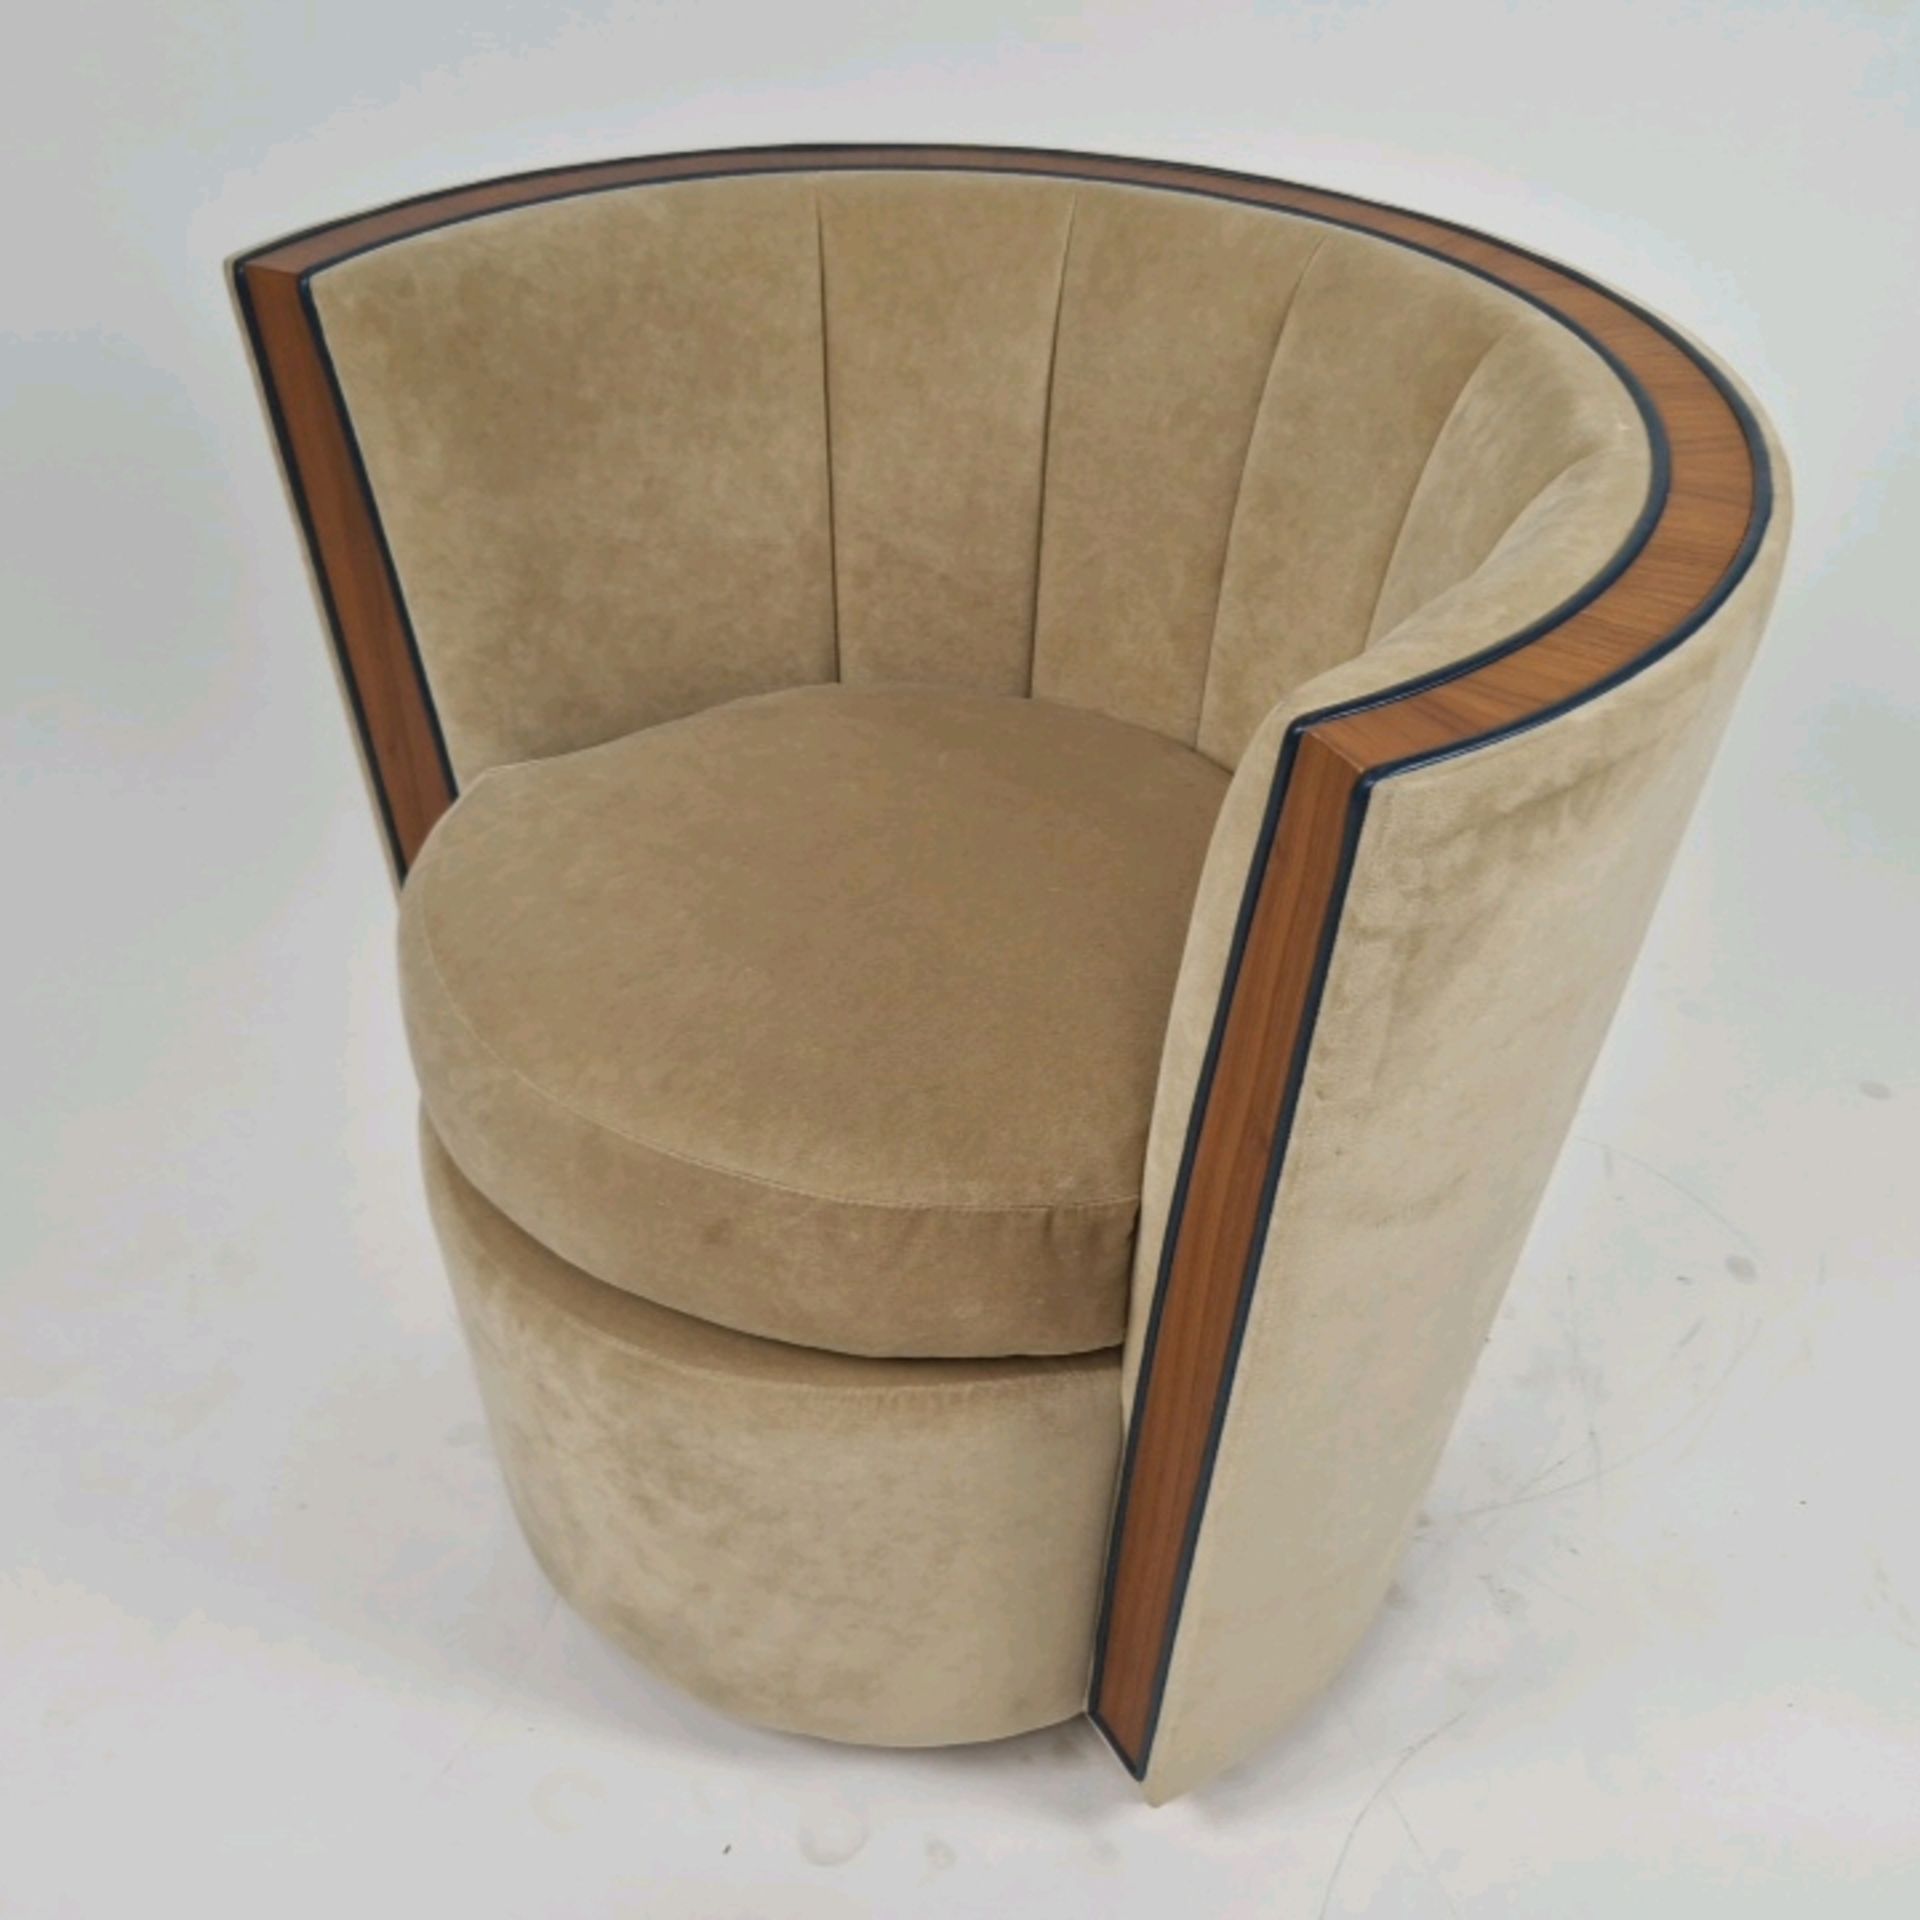 Bespoke David Linley Deco Tub Chair Made for Claridge's Suites - Image 4 of 6